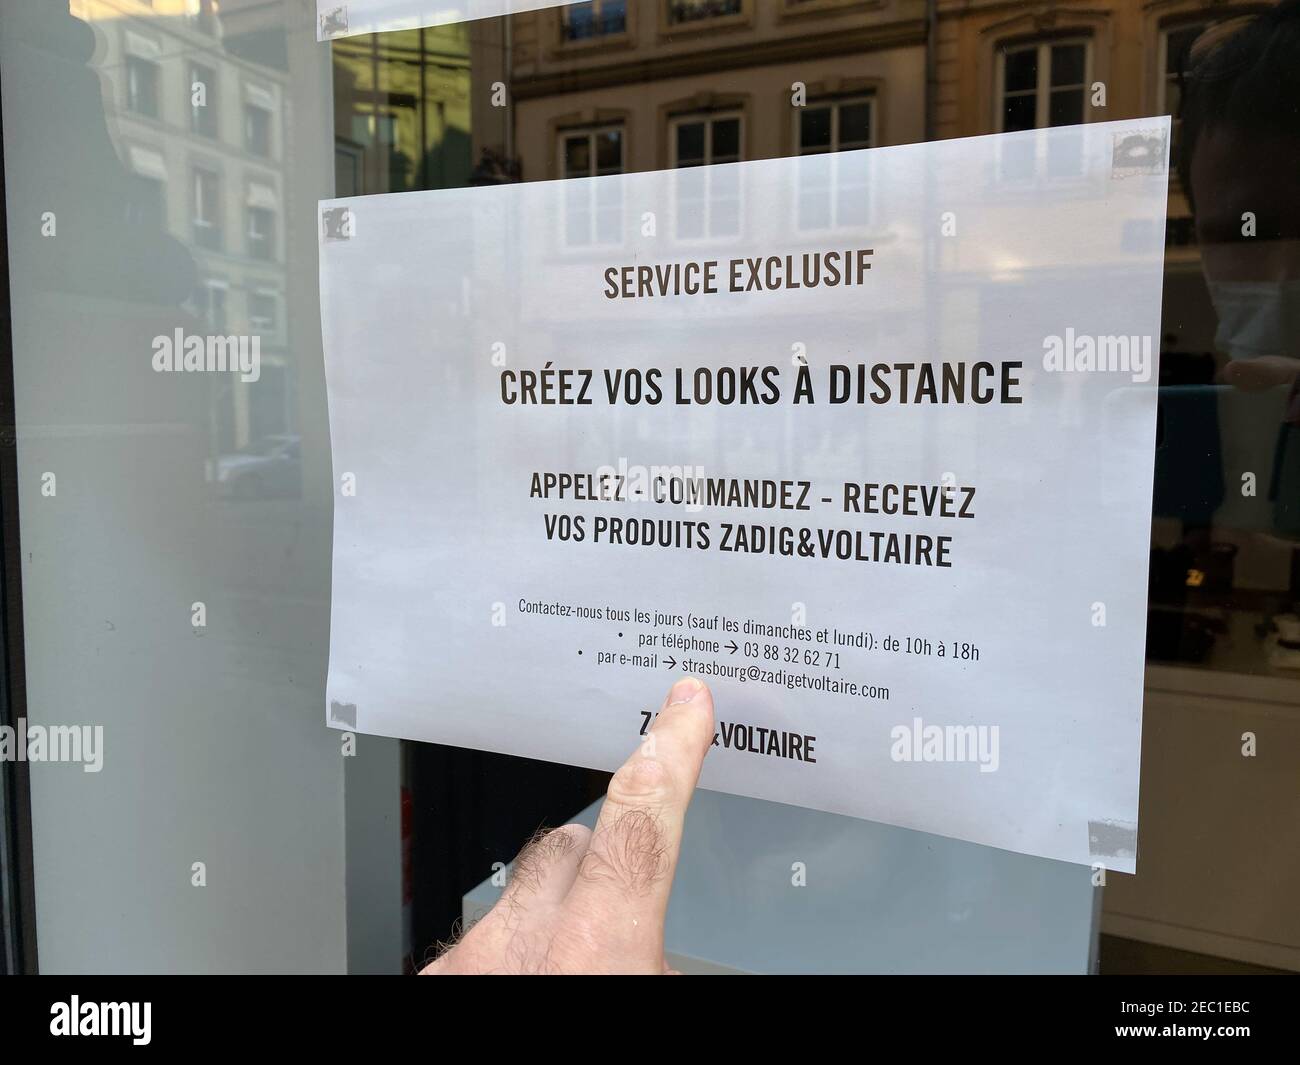 Strasbourg, France - Oct 31, 2020: Advertising of Zadig and Voltaire  closure due to COVID-19 lockdown pandemic offering Click and Collect  services order online and delivery of merchandise Stock Photo - Alamy